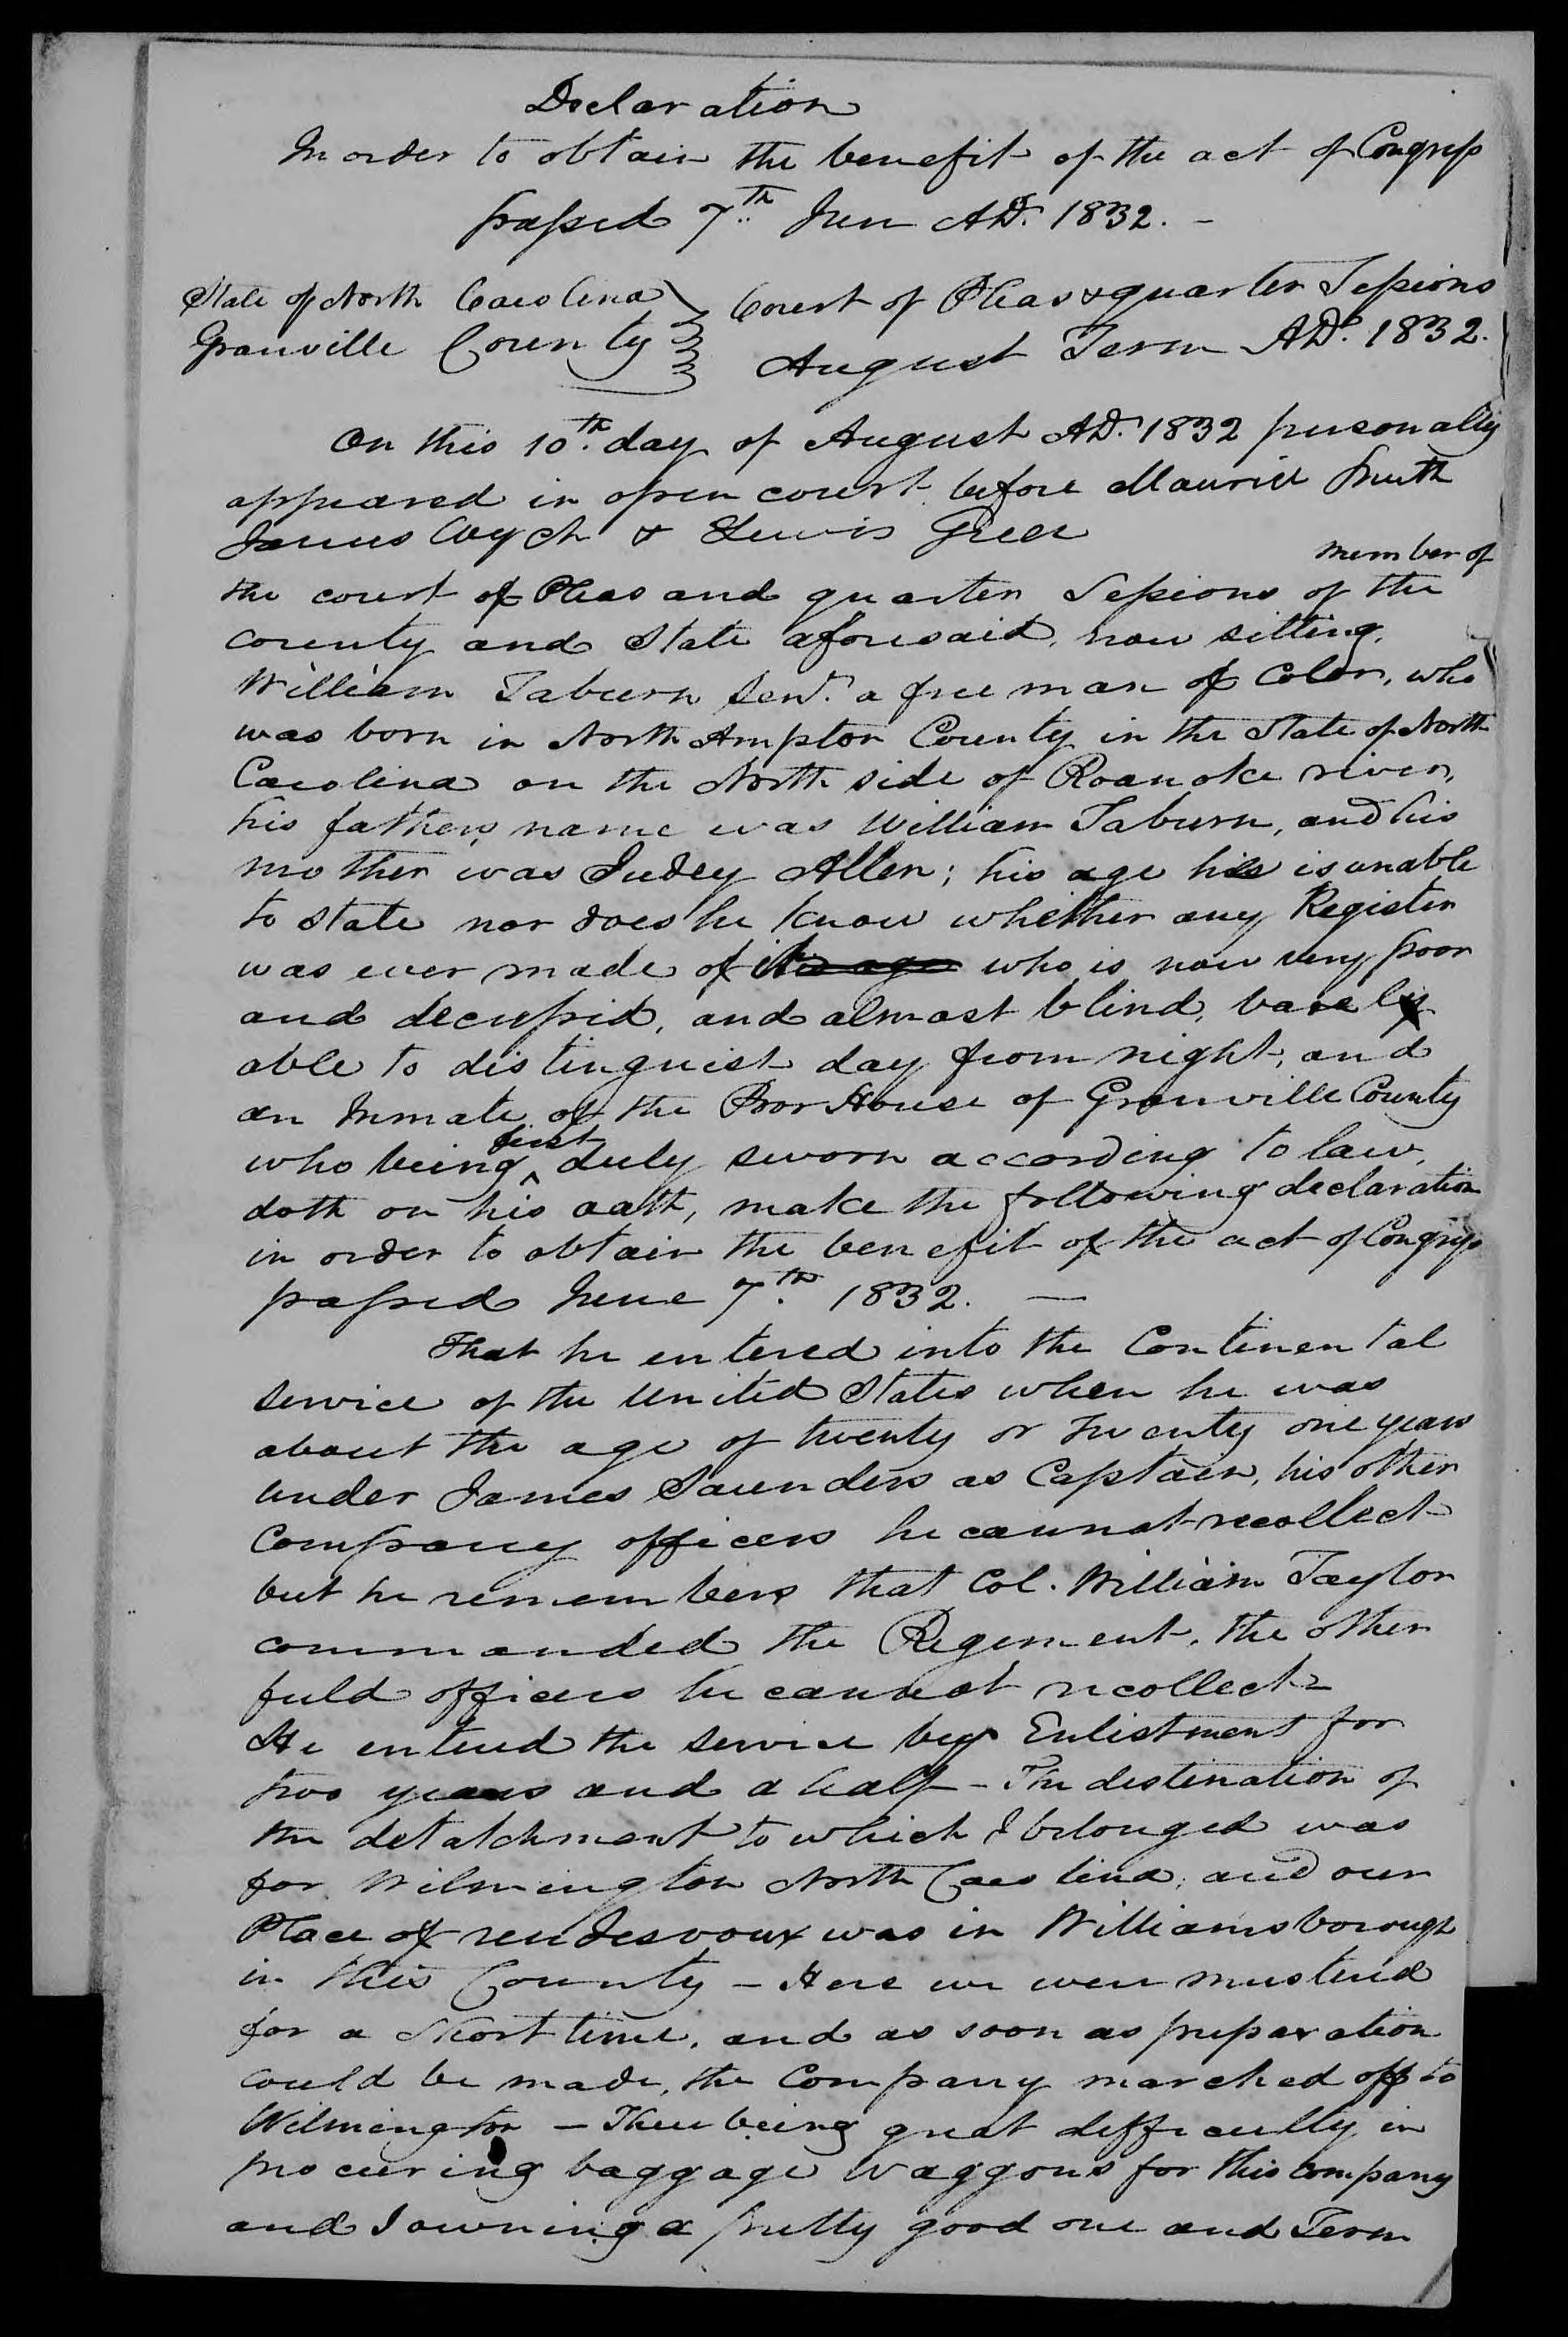 Application for a Veteran's Pension from William Taburn, 10 August 1832, page 1